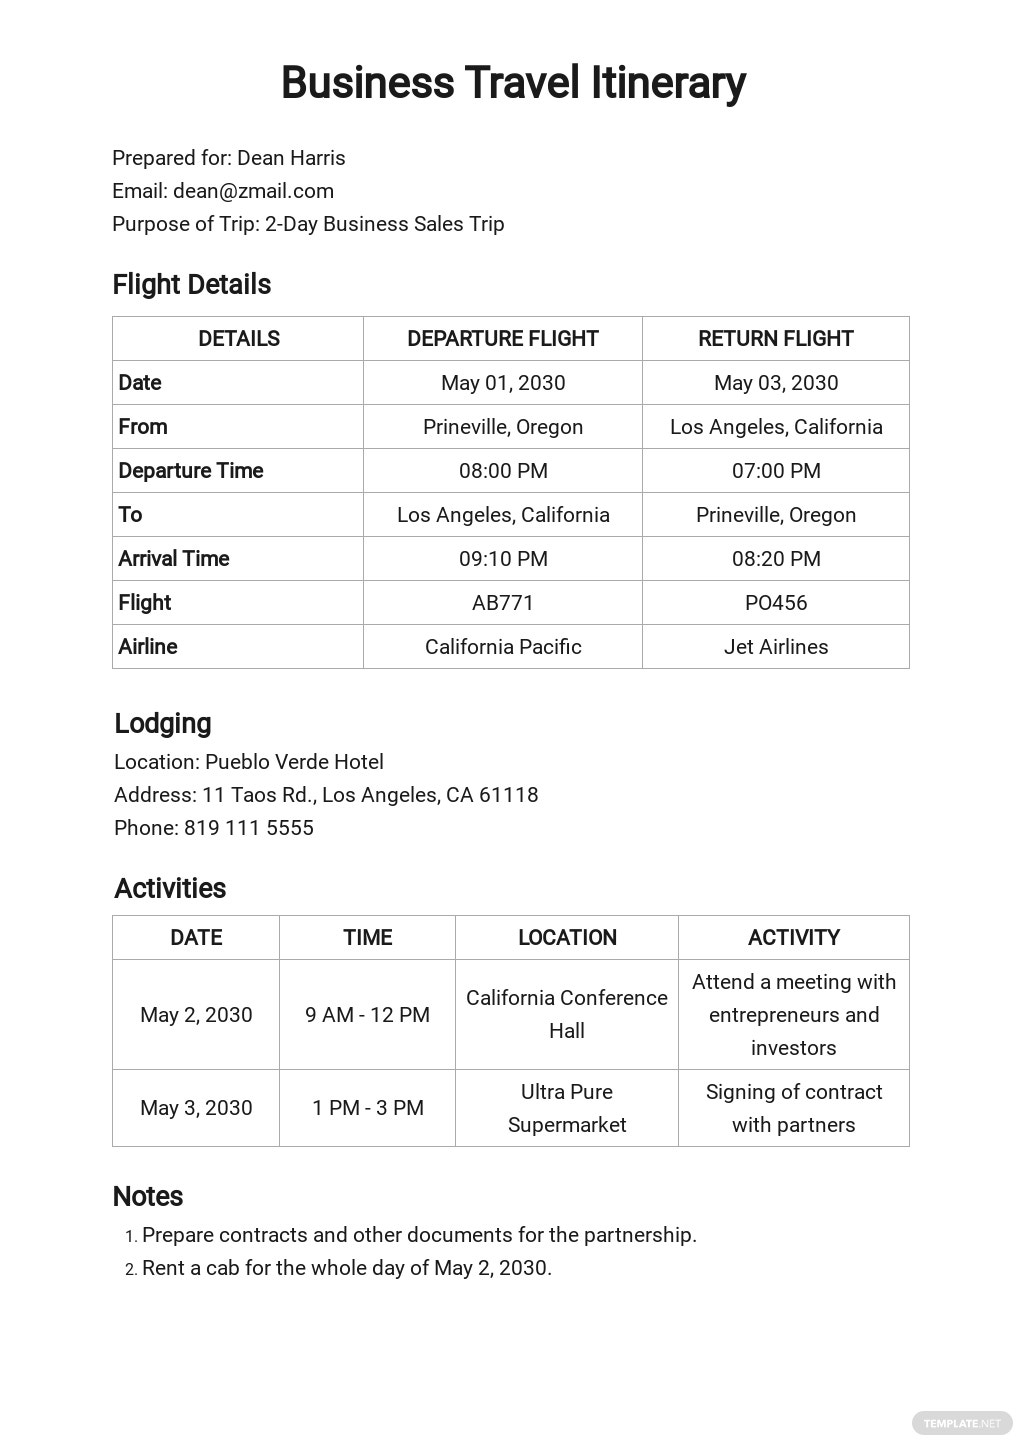 Business Itinerary Templates in Google Docs  Template With Regard To Business Trip Travel Itinerary Template